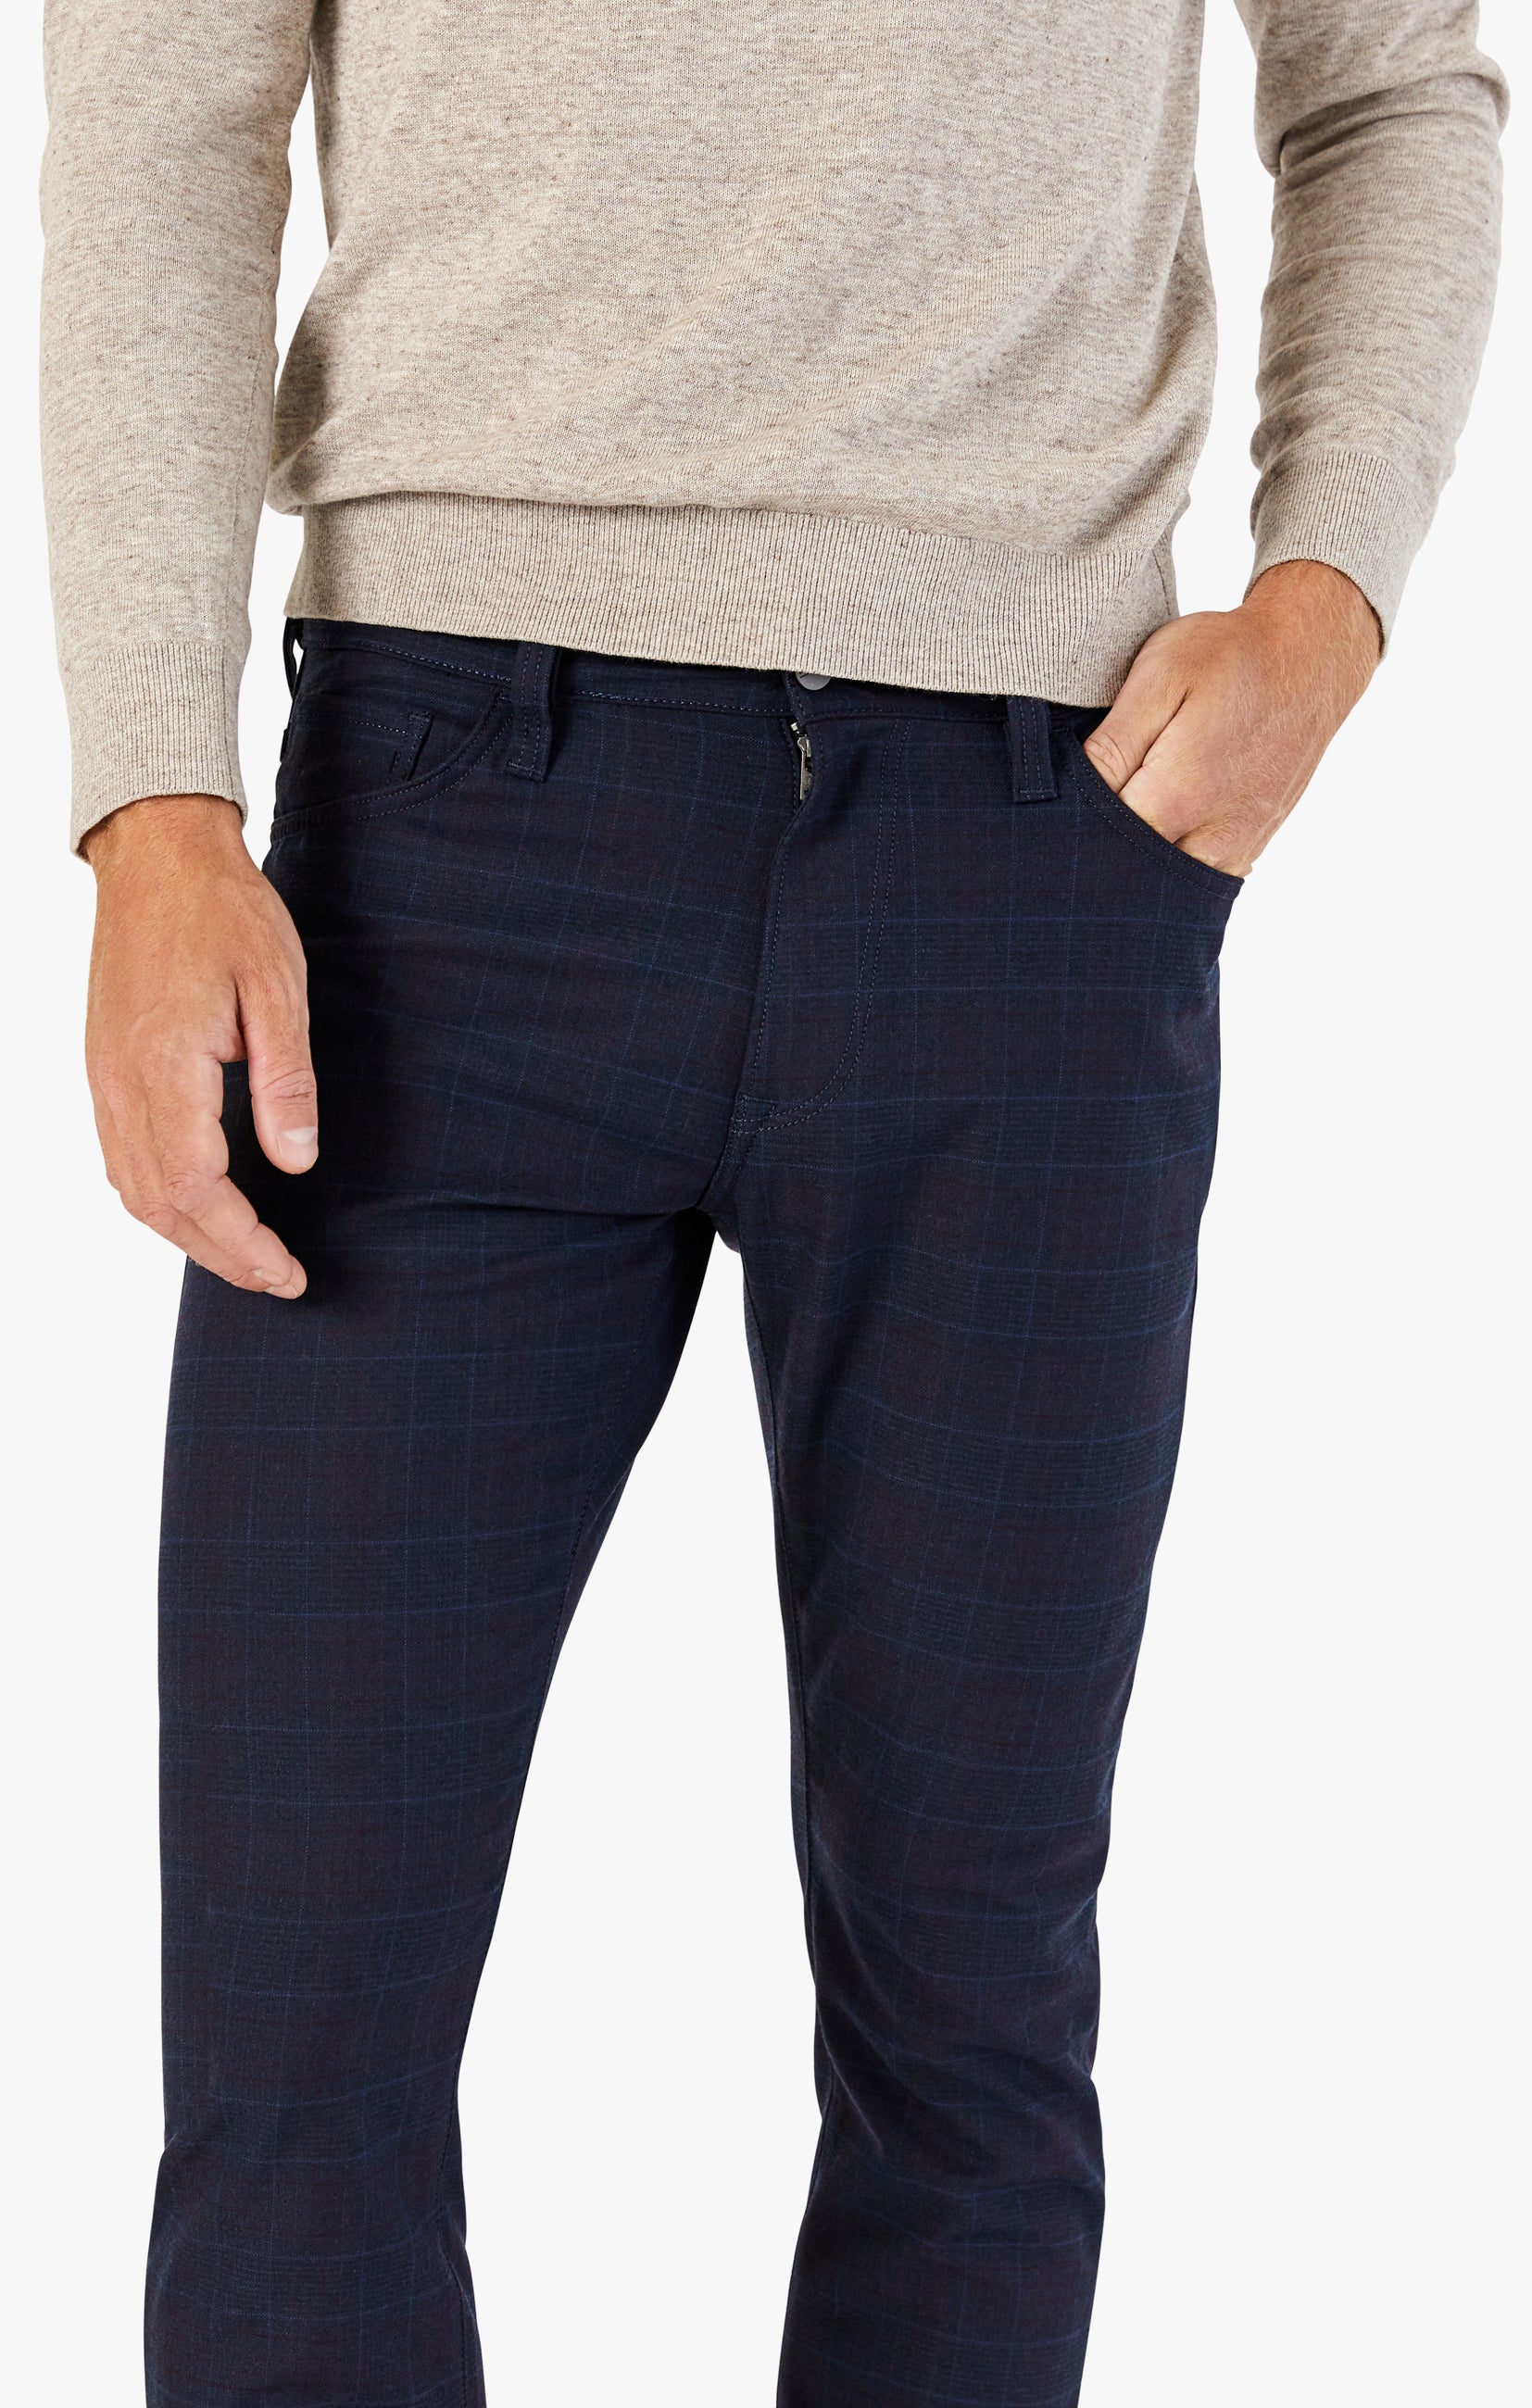 Cool Tapered Leg Pants In Navy Fancy Checked Image 5